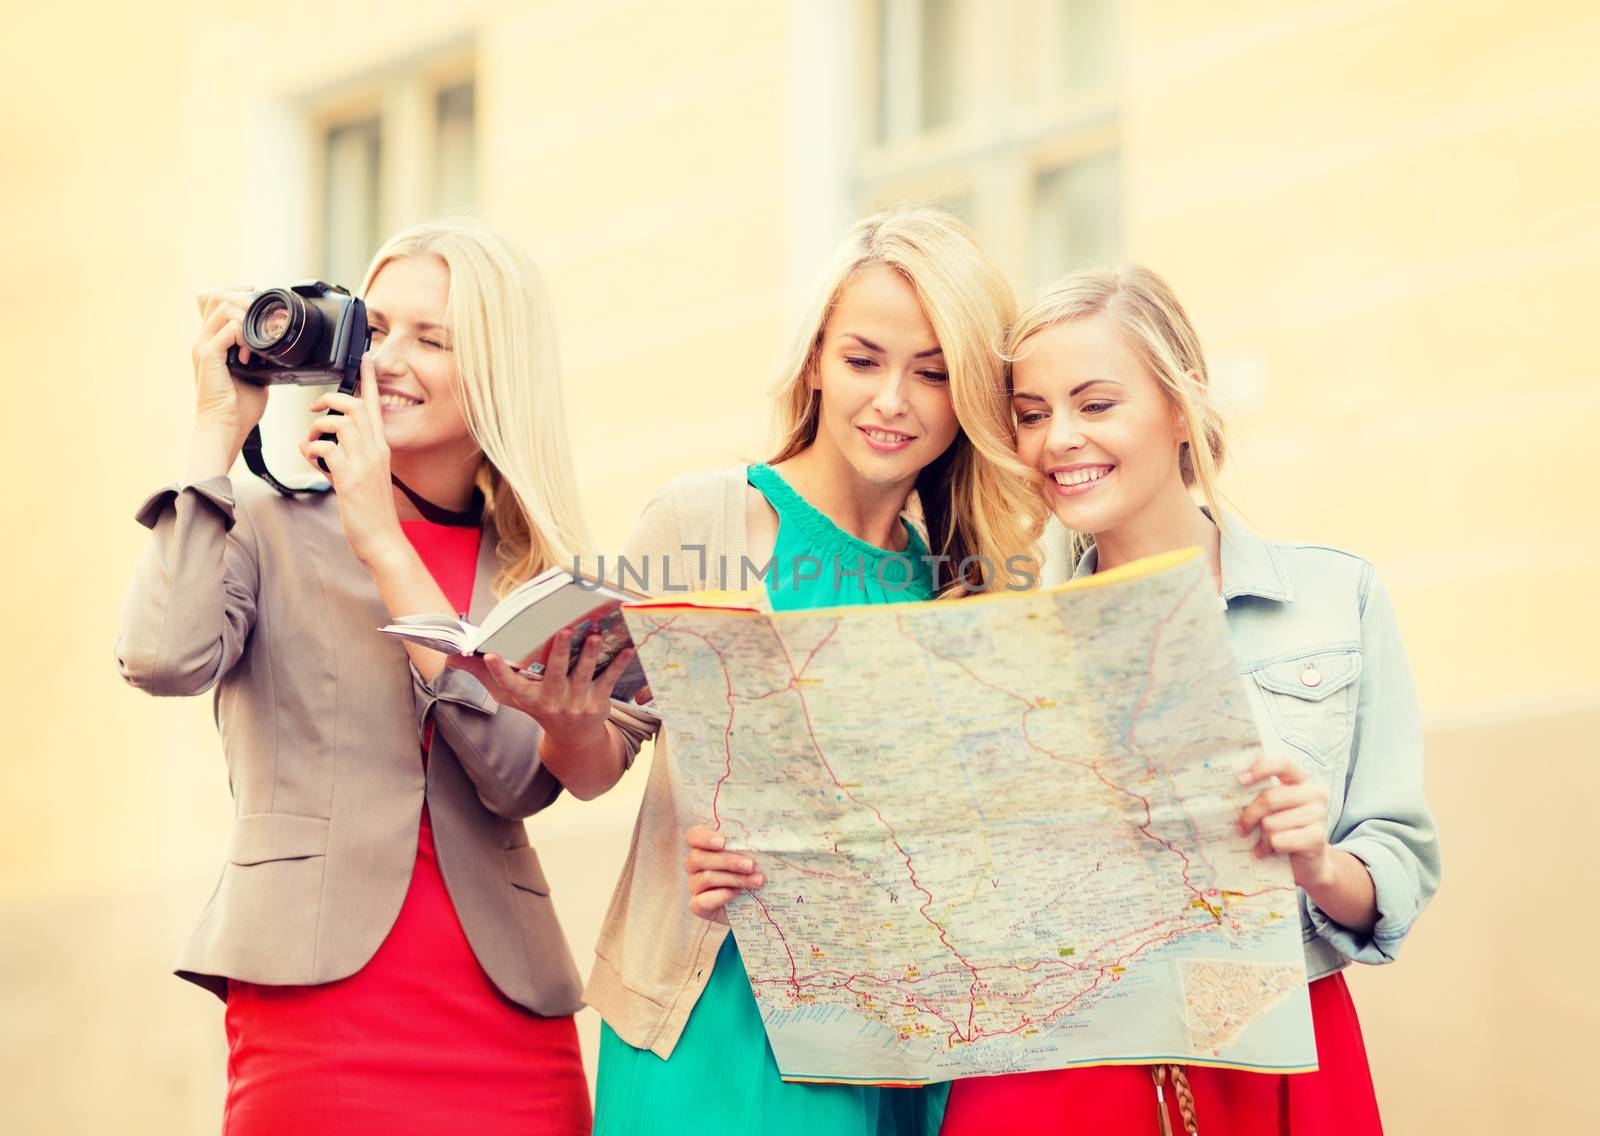 women with tourist map and camera in the city by dolgachov